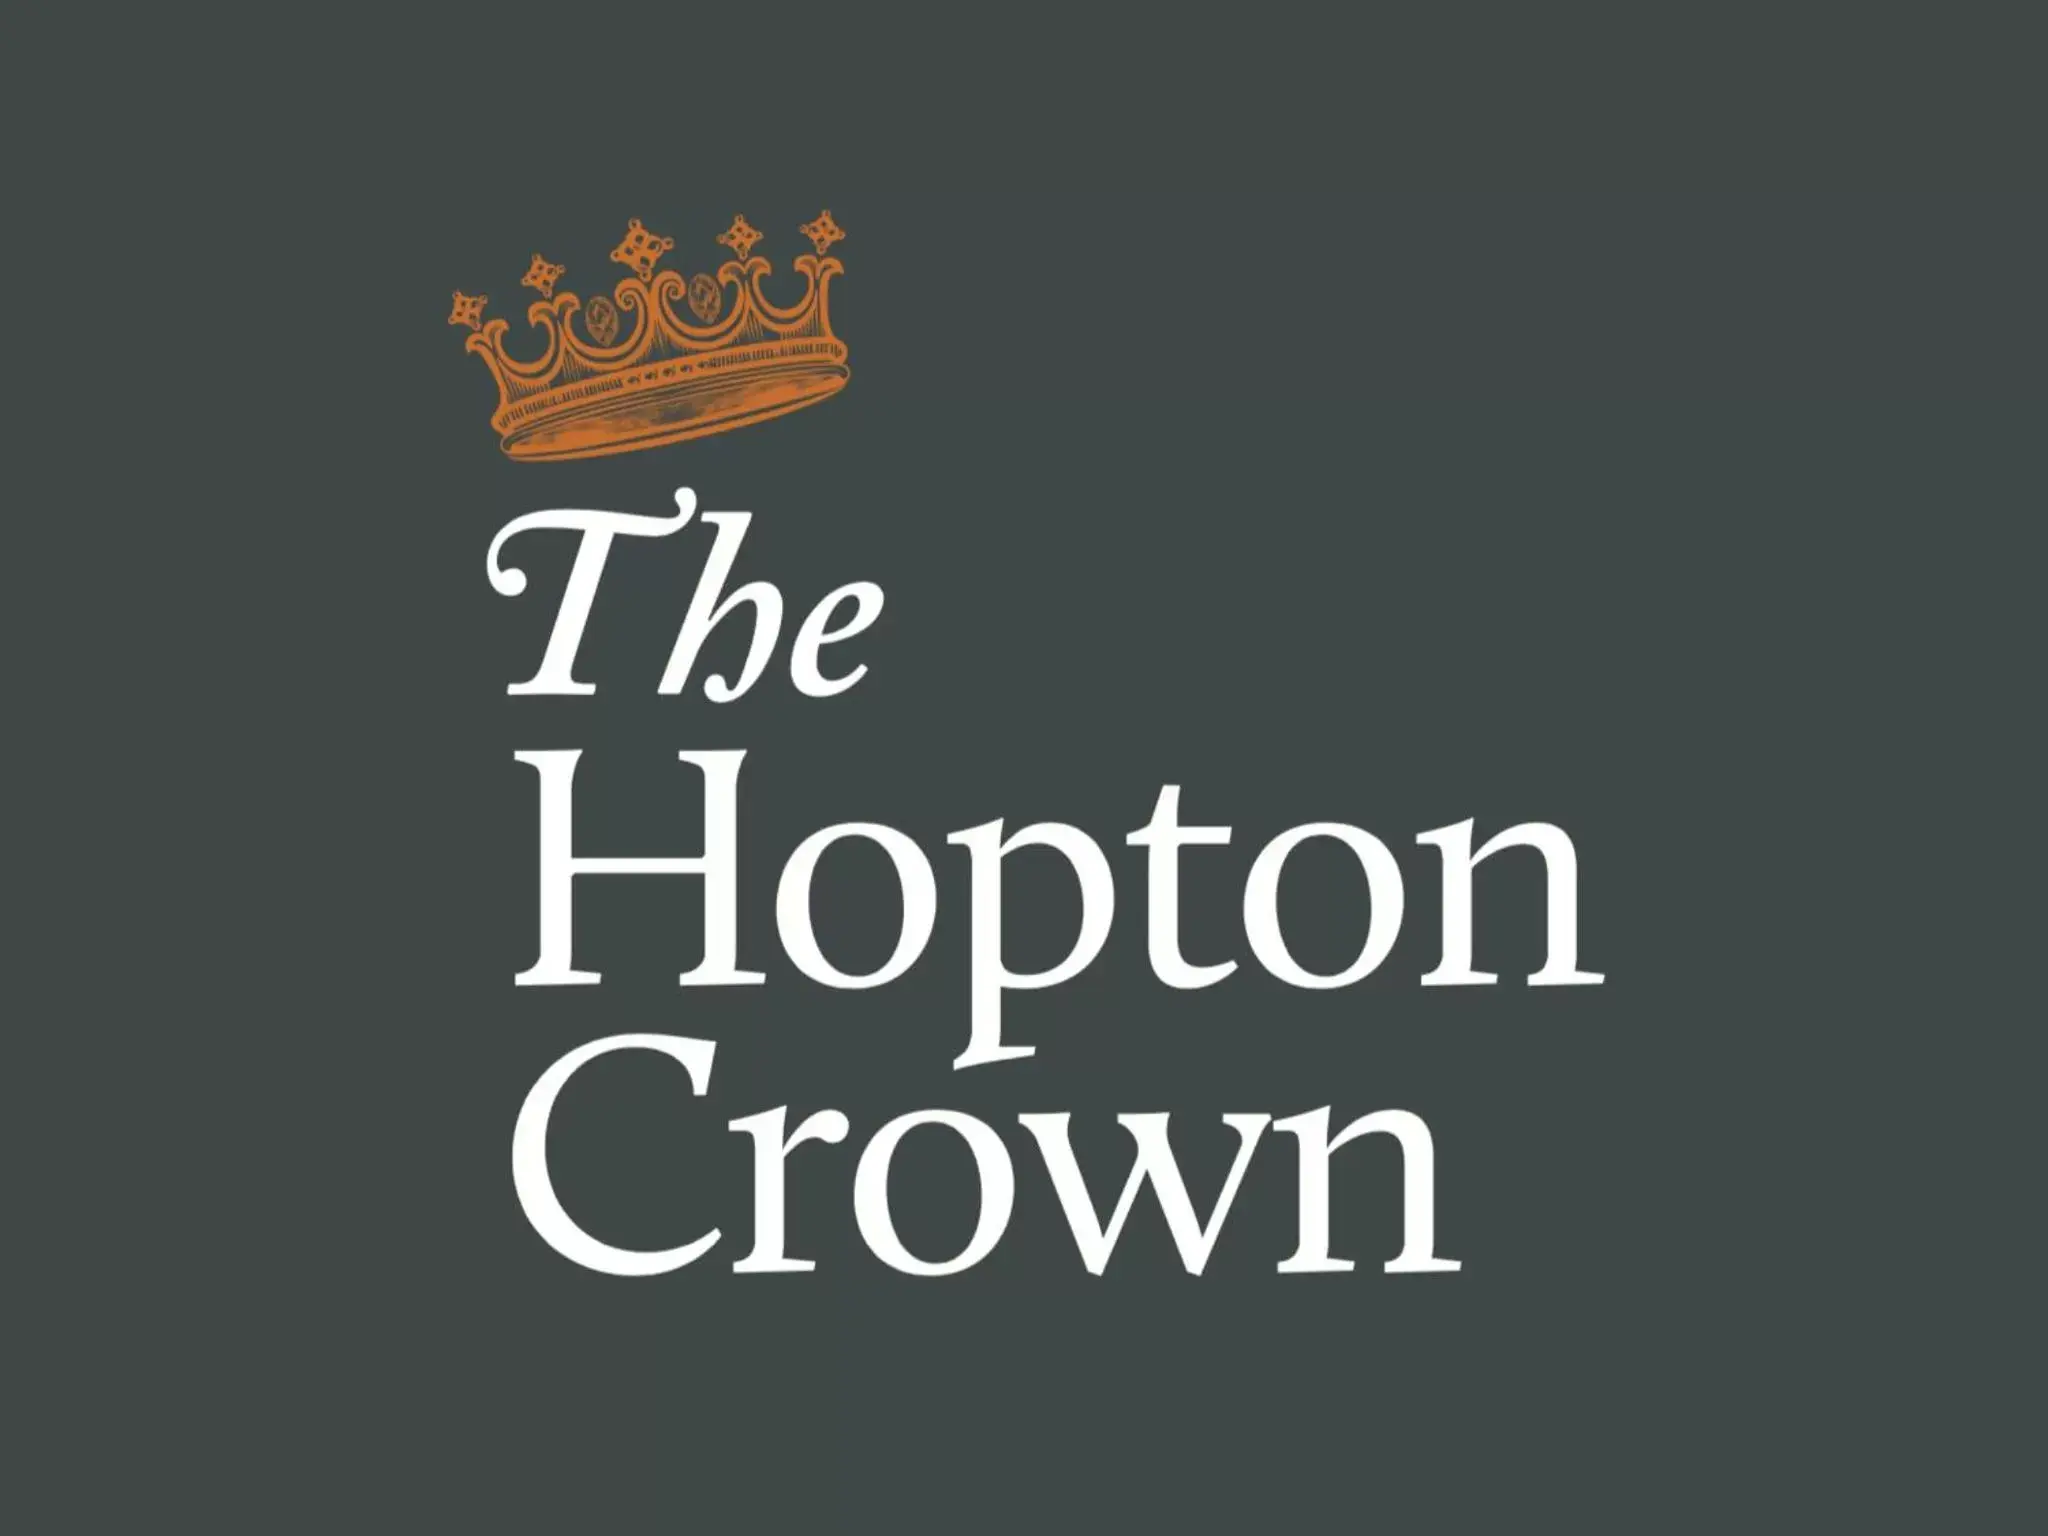 Property logo or sign in The Hopton Crown